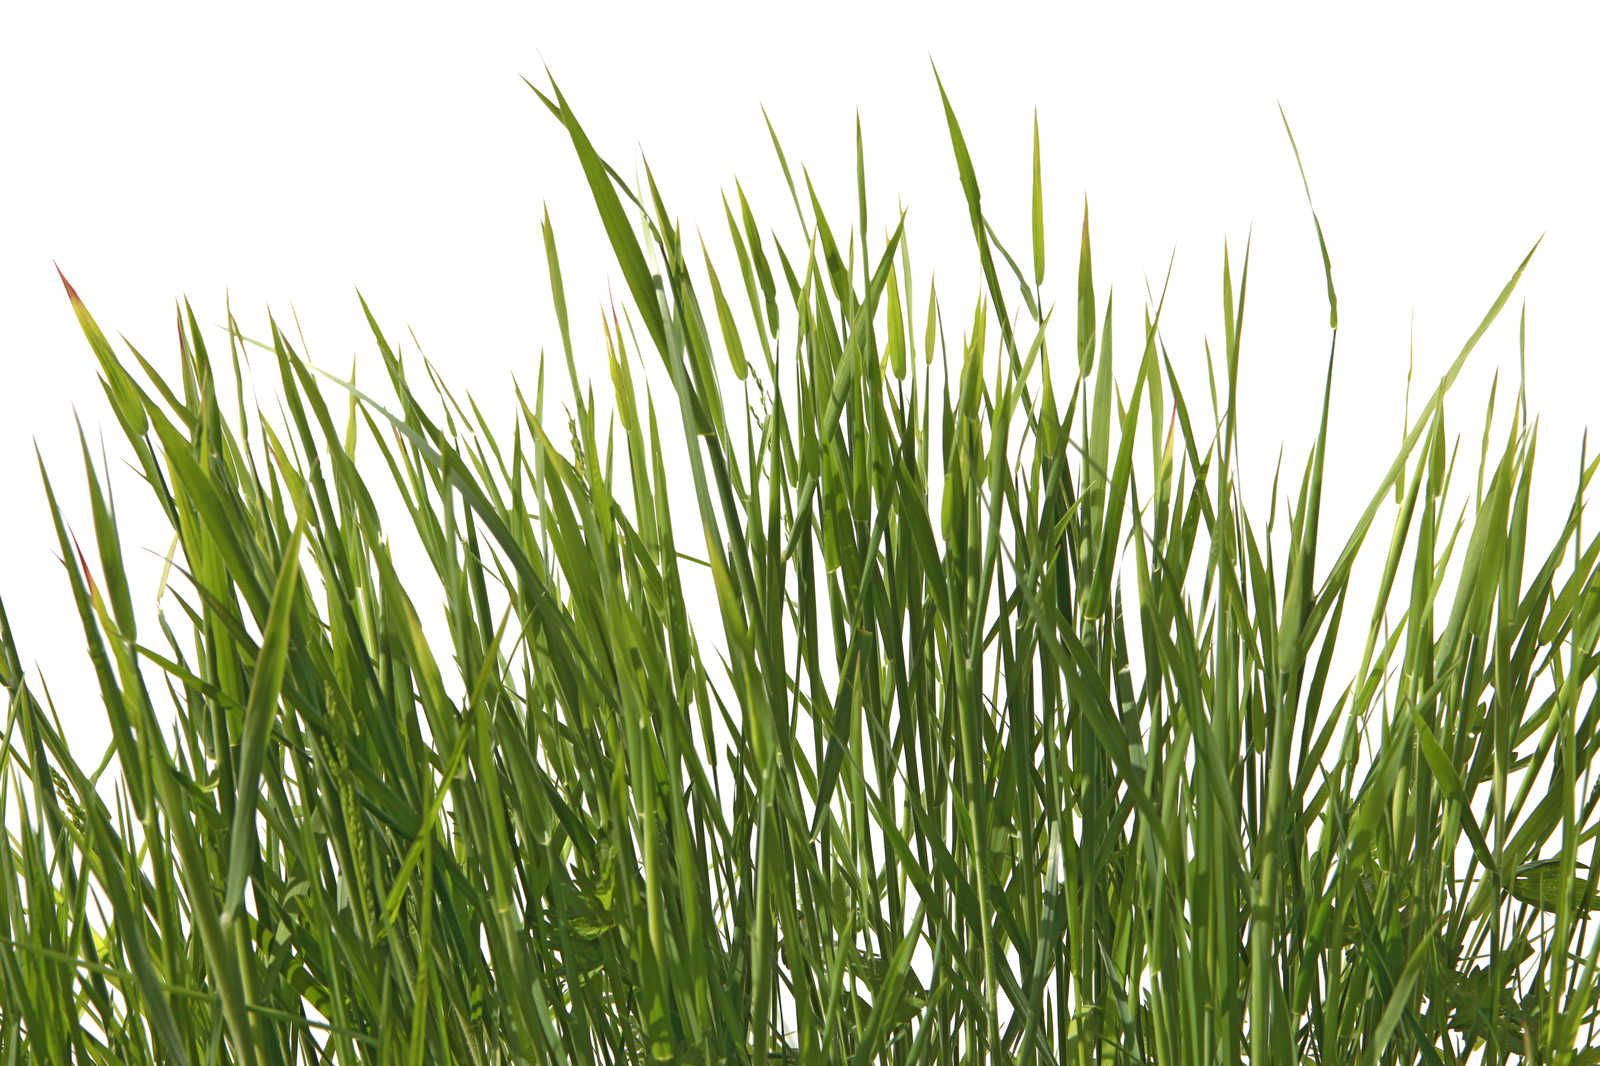             Canvas painting Grasses detail with white background - 0,90 m x 0,60 m
        